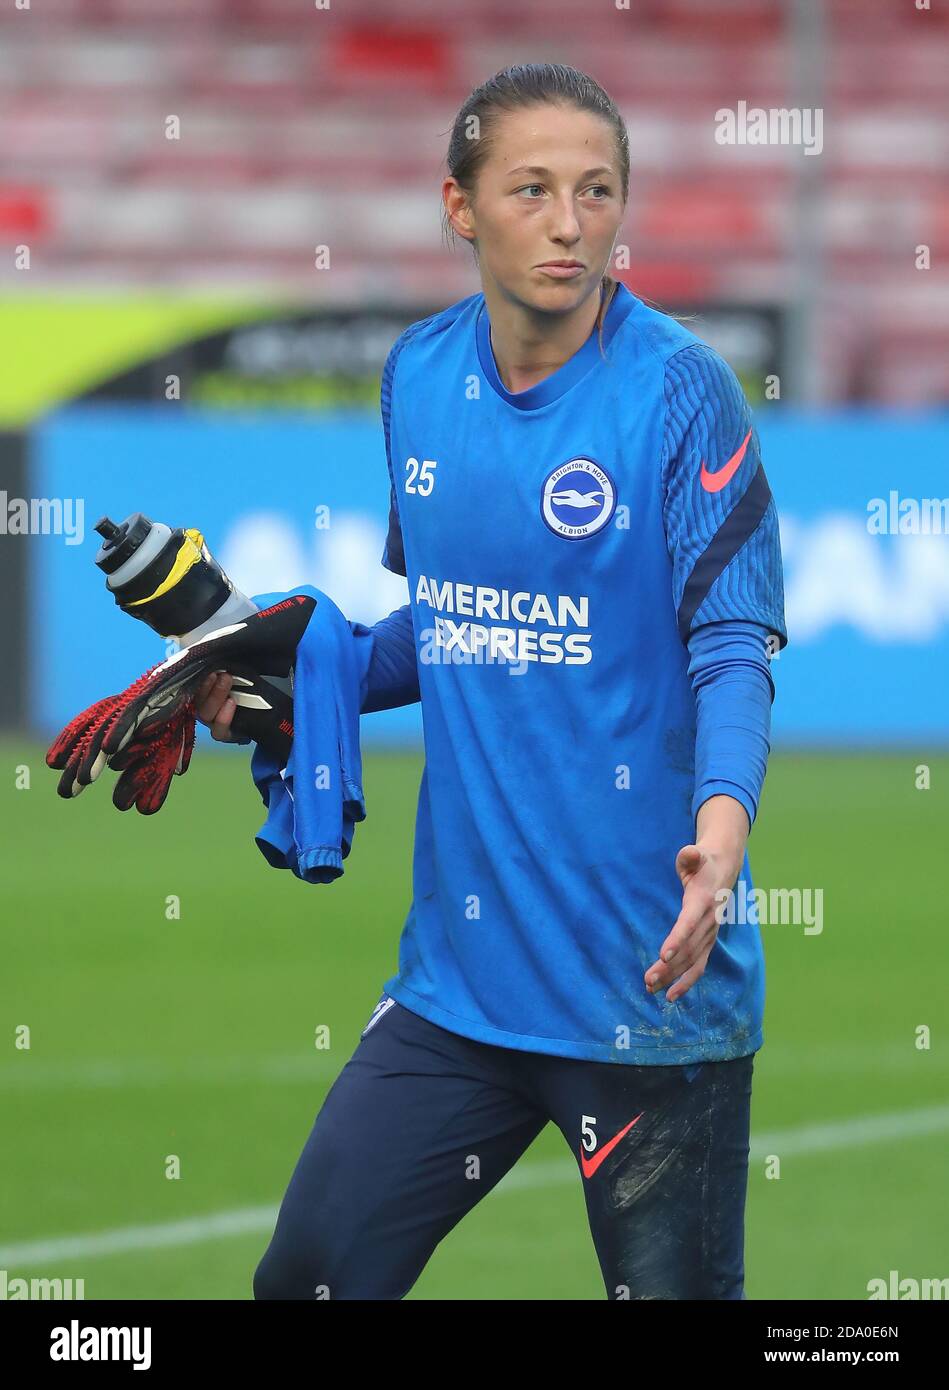 Brighton and Hove Albion goalkeeper Cecilie Fiskerstrand before the FA Women's Super League match at the People's Pension Stadium, Crawley. Stock Photo